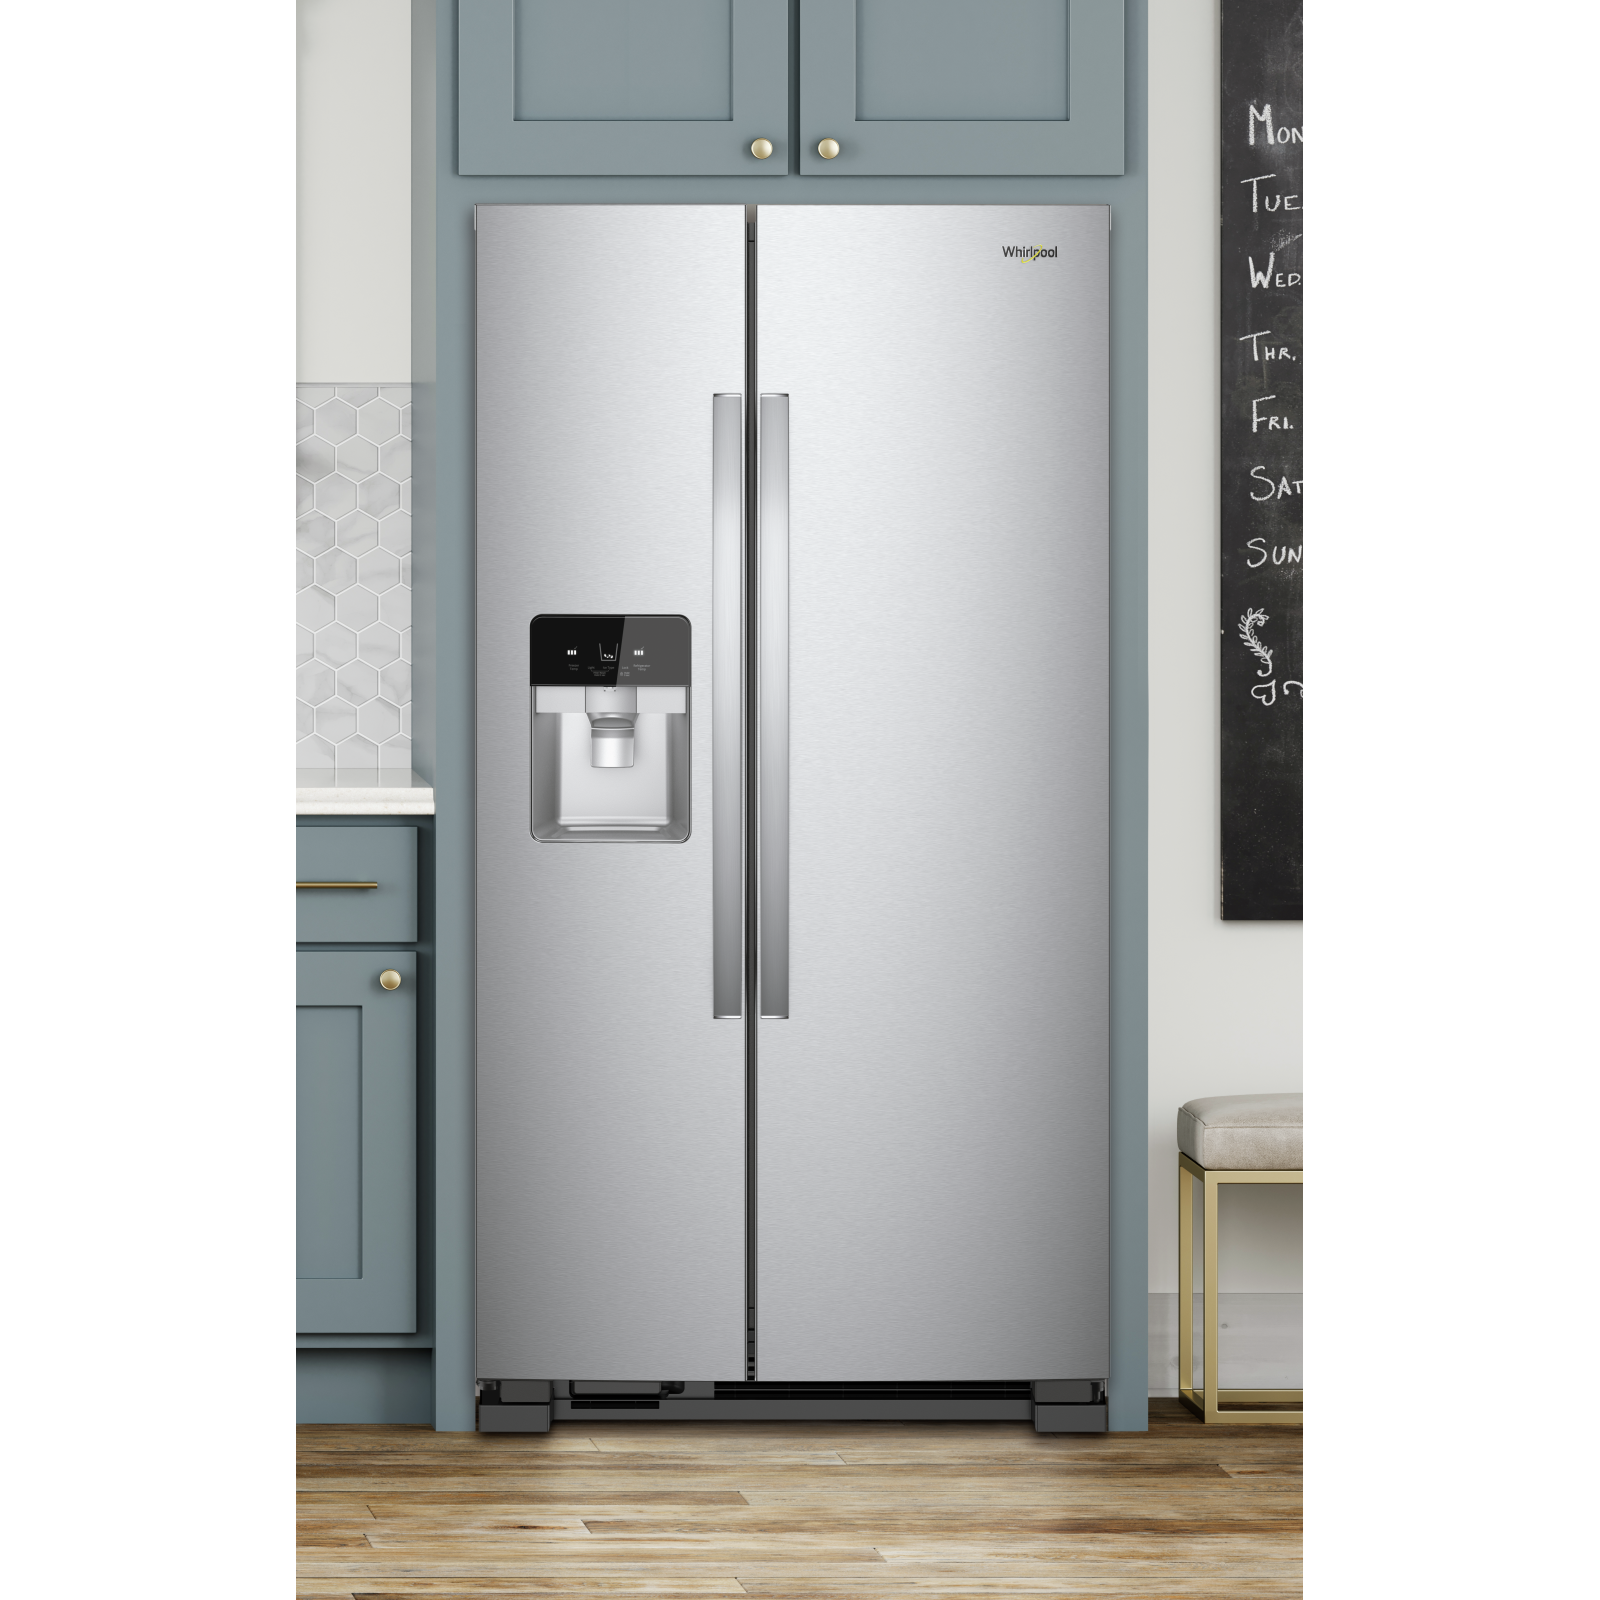 Whirlpool - 35.875 Inch 25 cu. ft Side by Side Refrigerator in Stainless - WRS555SIHZ